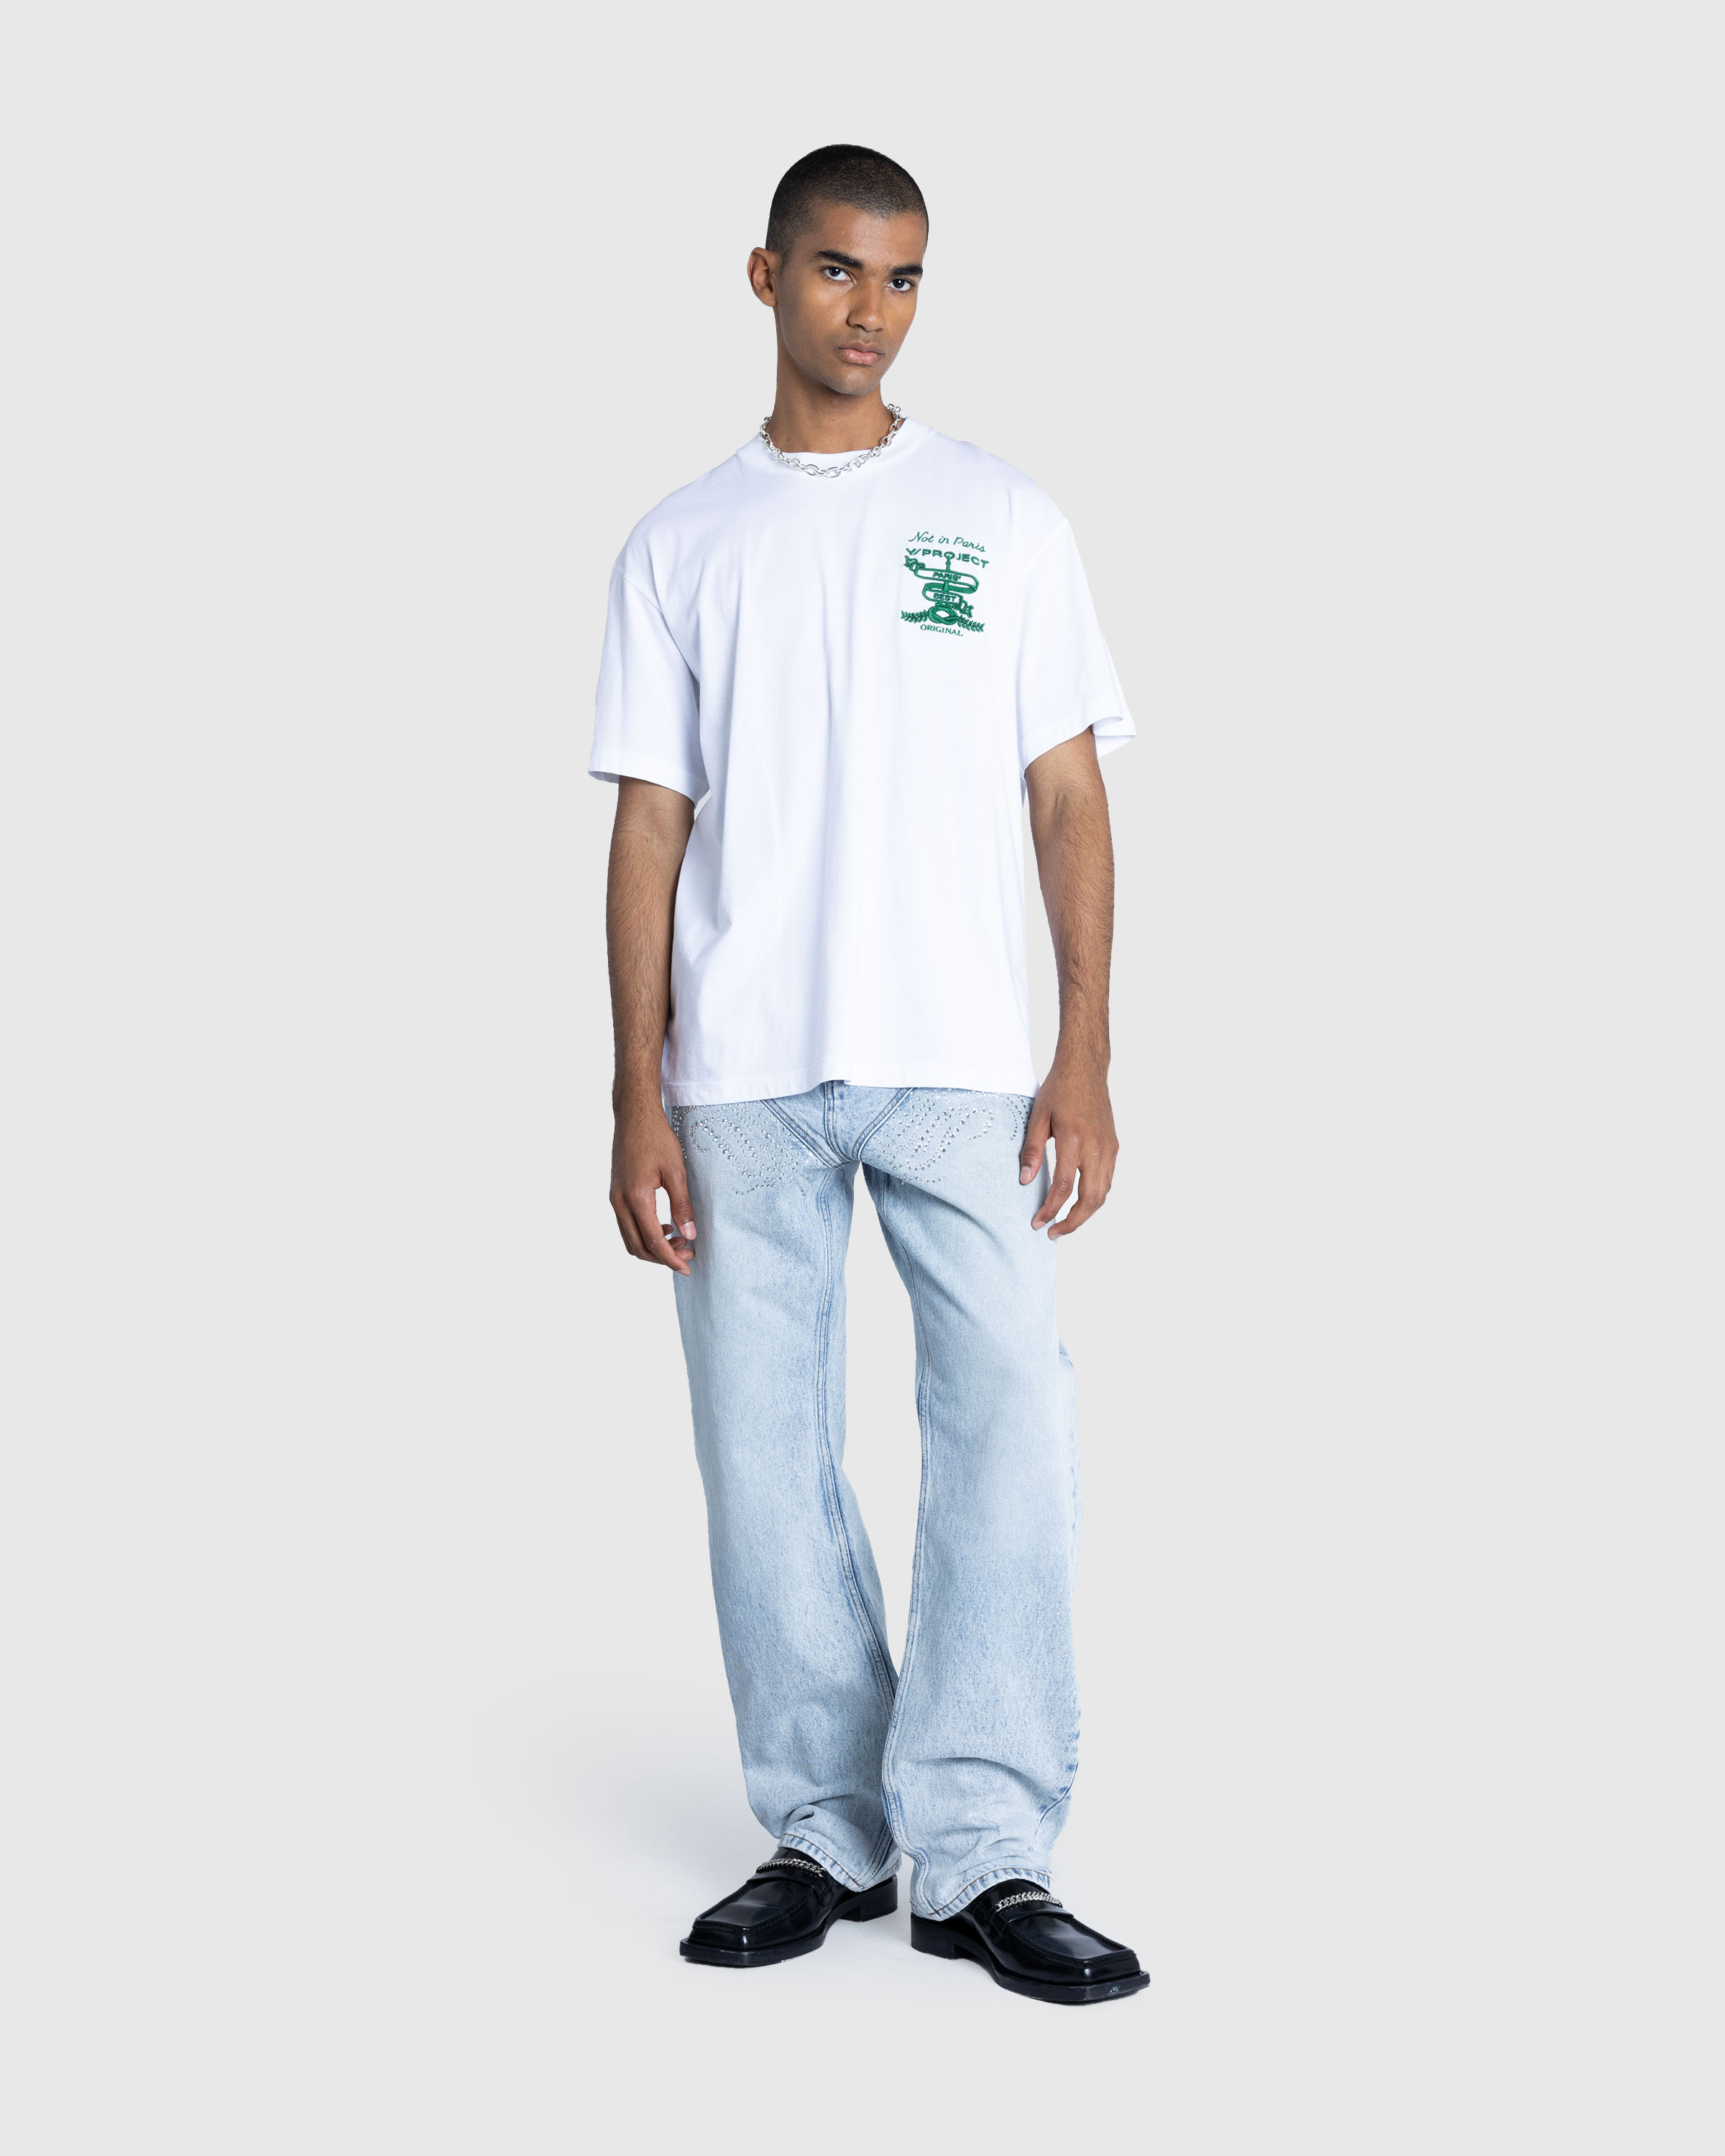 Y/Project x Highsnobiety – Not In Paris T-Shirt White - T-Shirts - White - Image 4